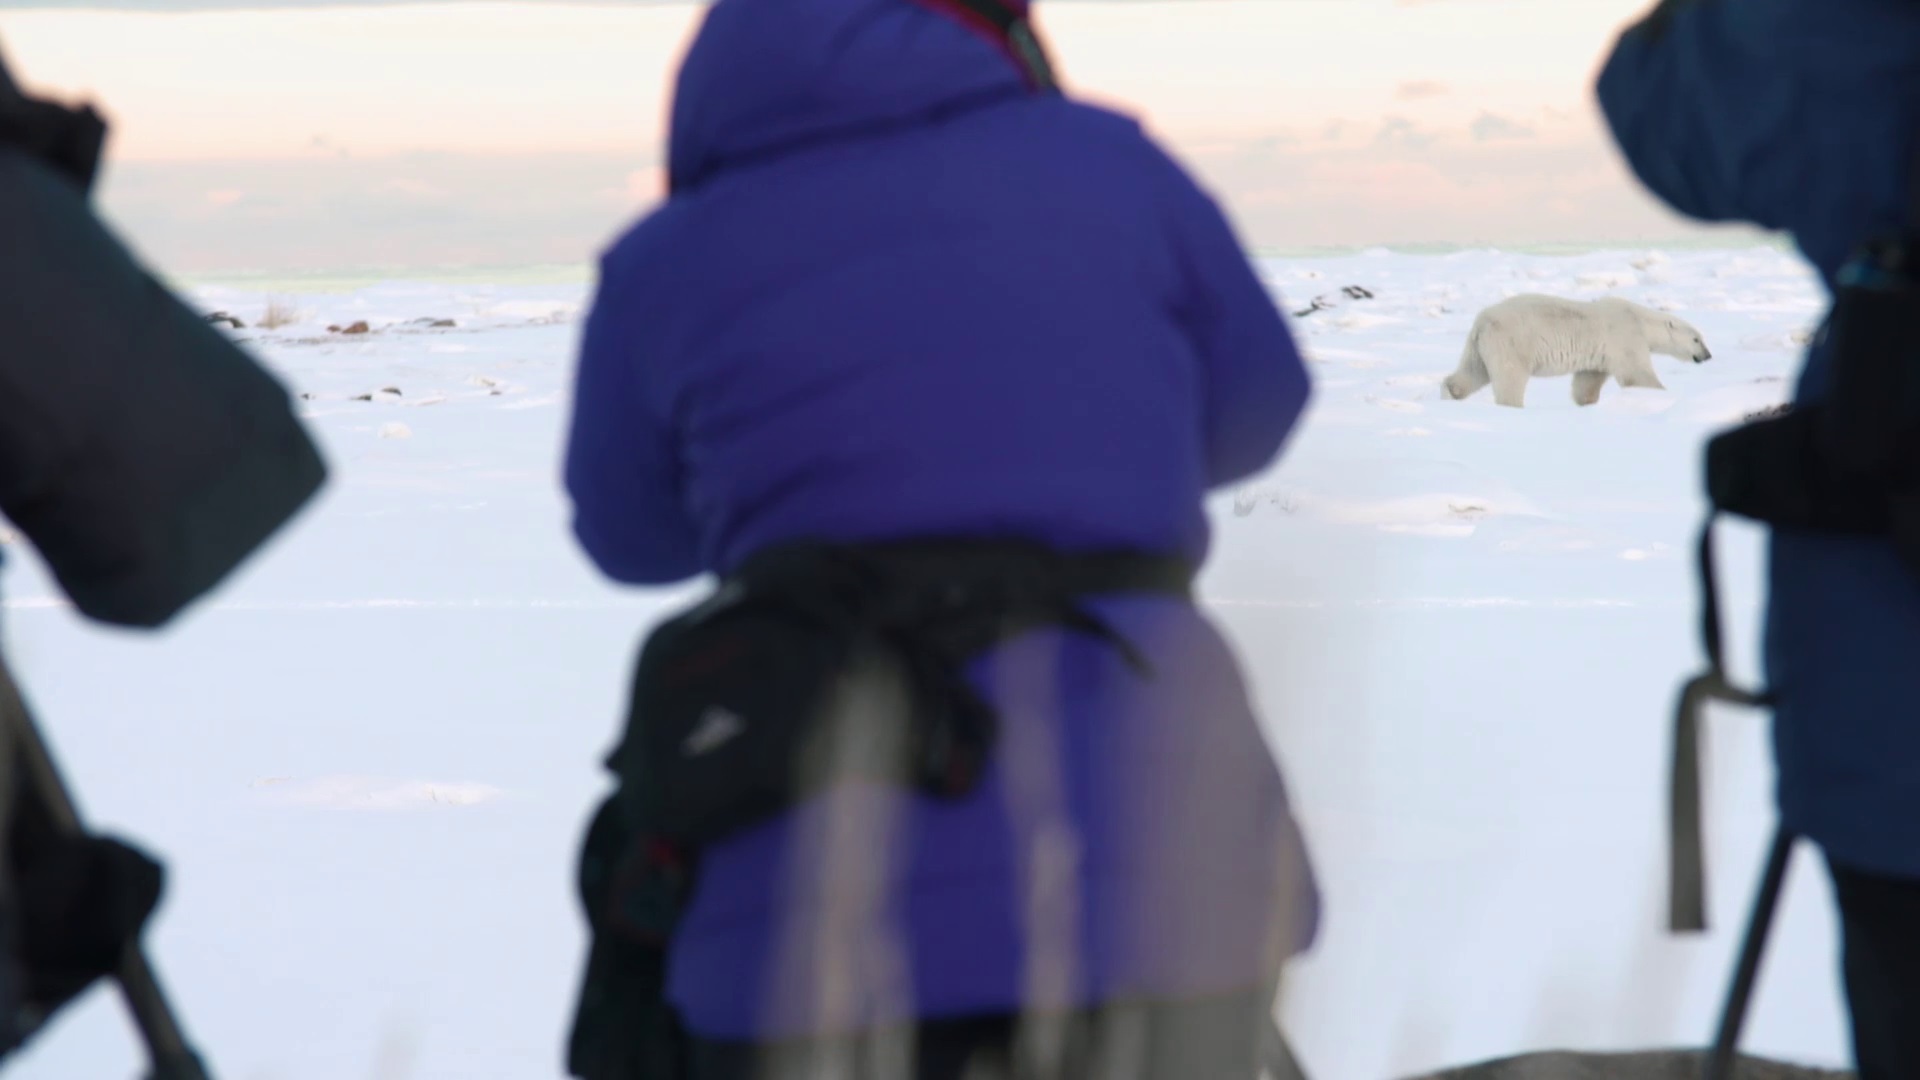 Guests of Seal River Heritage Lodge observing a polar bear at ground level